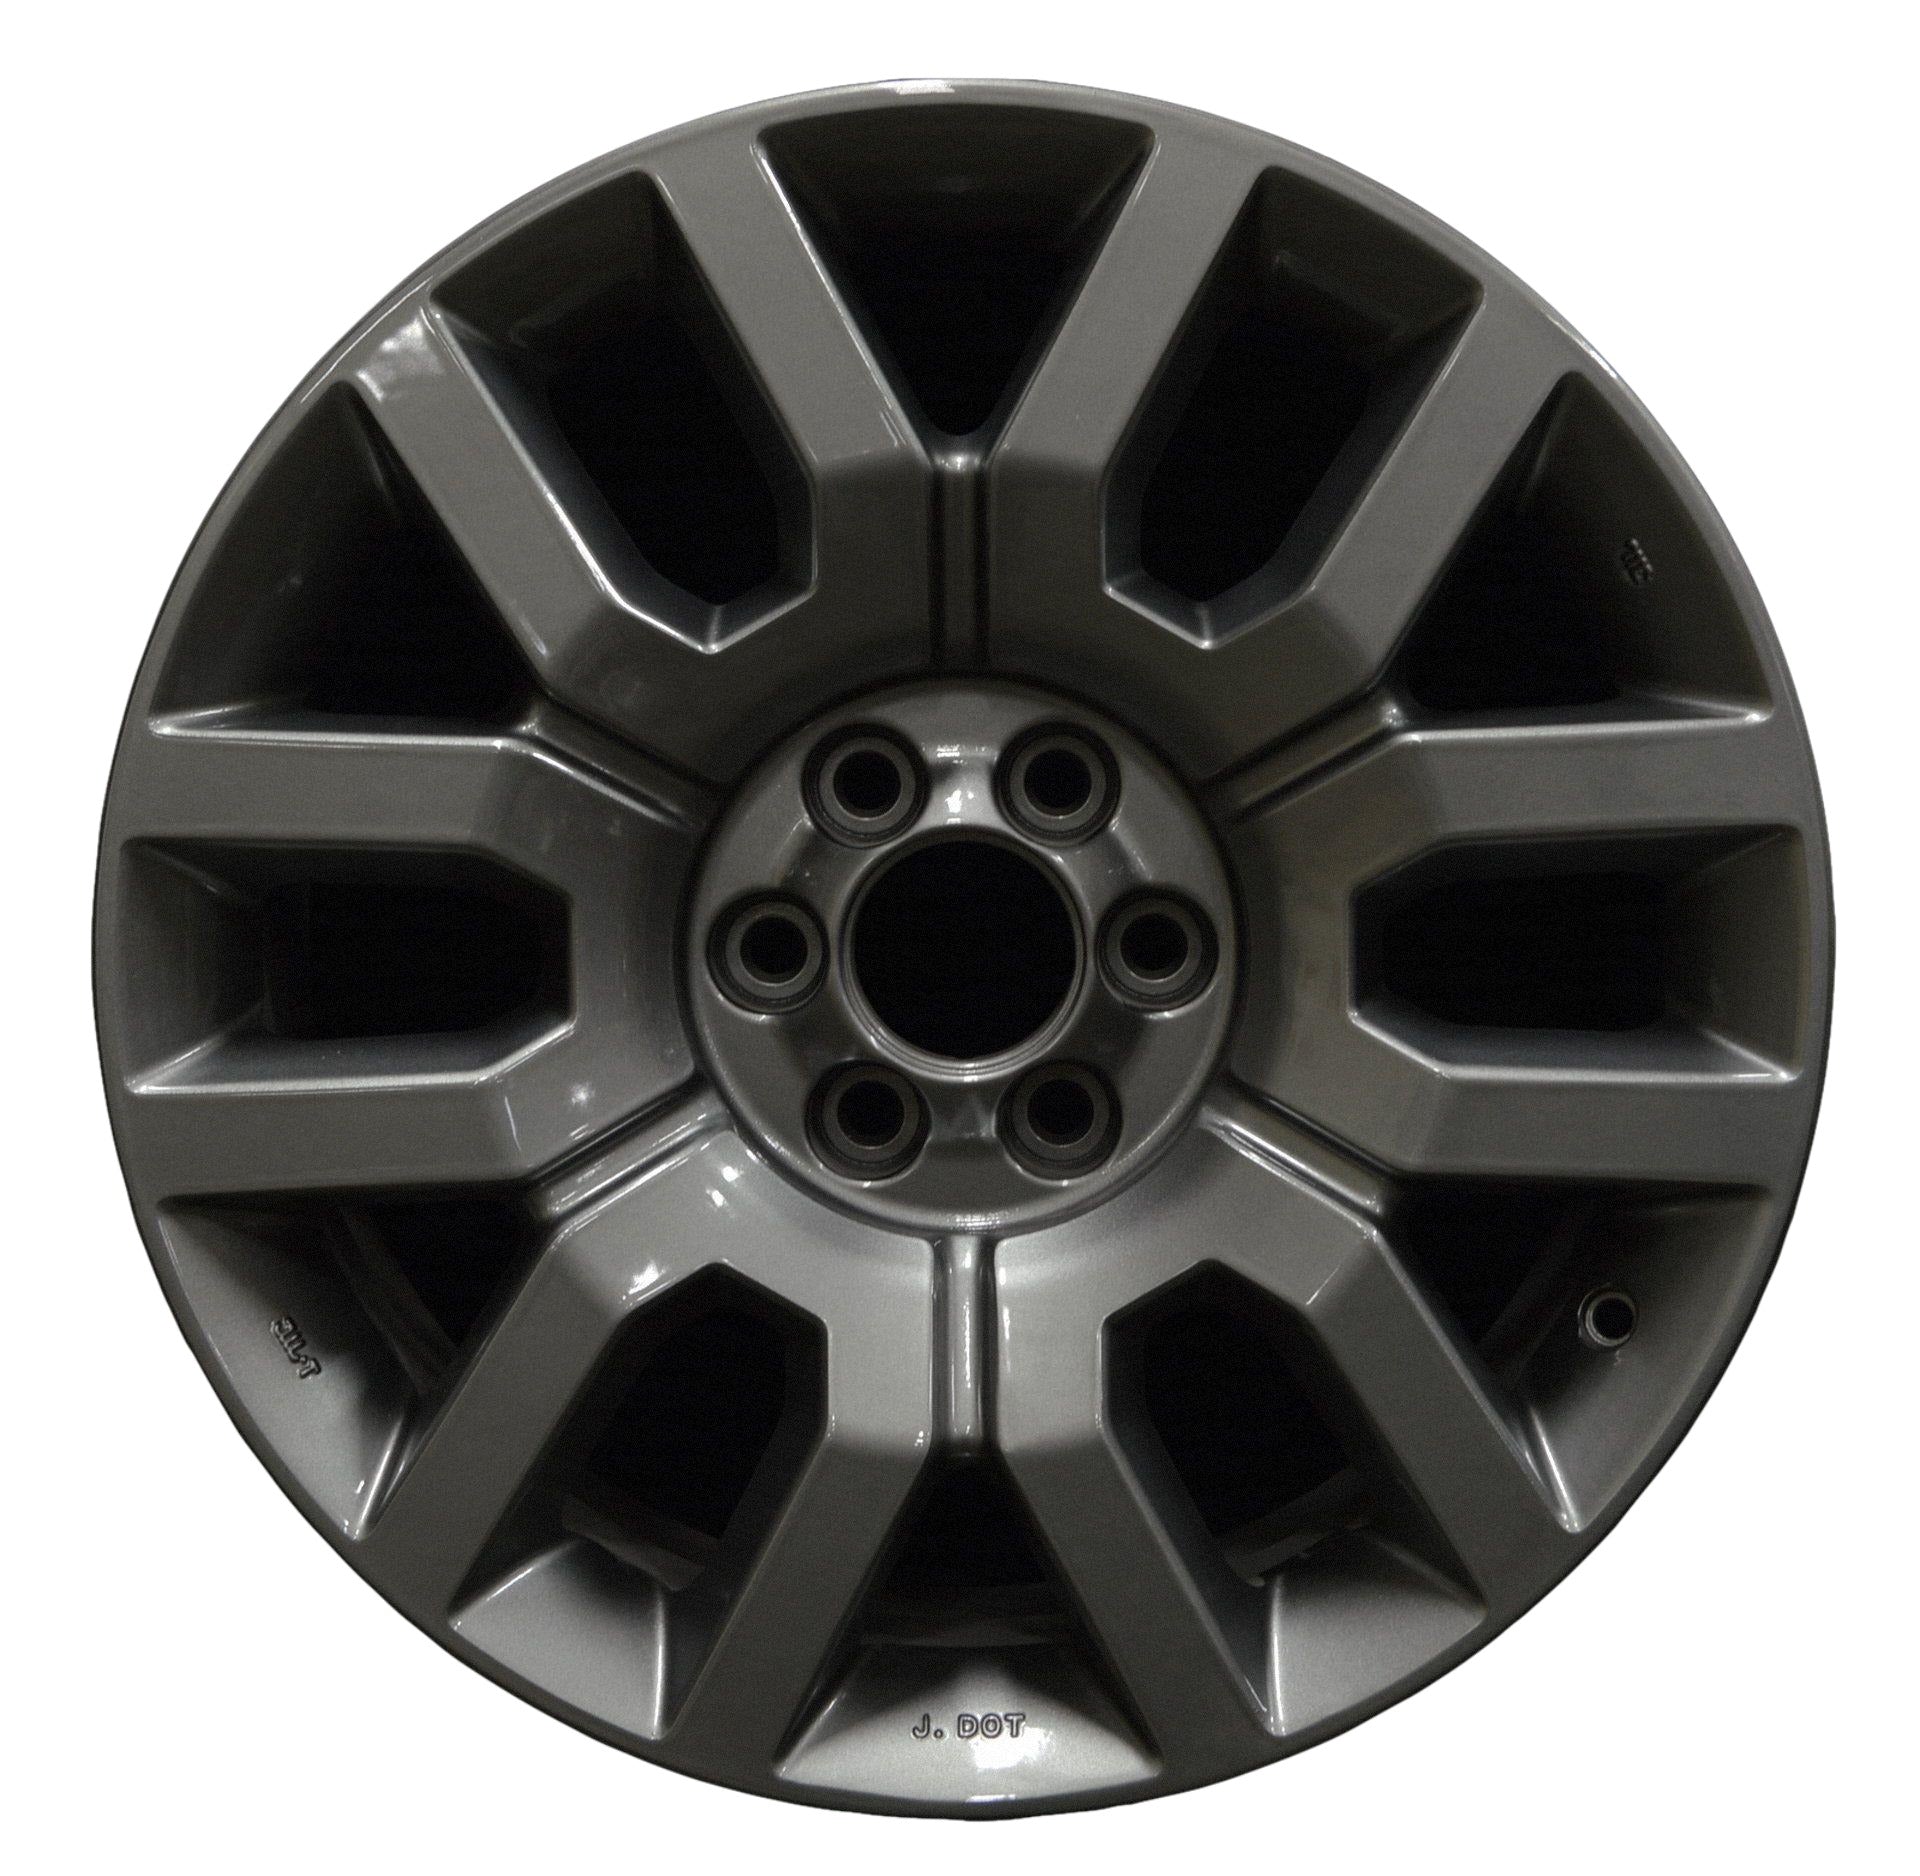 Nissan Frontier  2009, 2010, 2011, 2012, 2013 Factory OEM Car Wheel Size 18x7.5 Alloy WAO.62533.LC63.FF